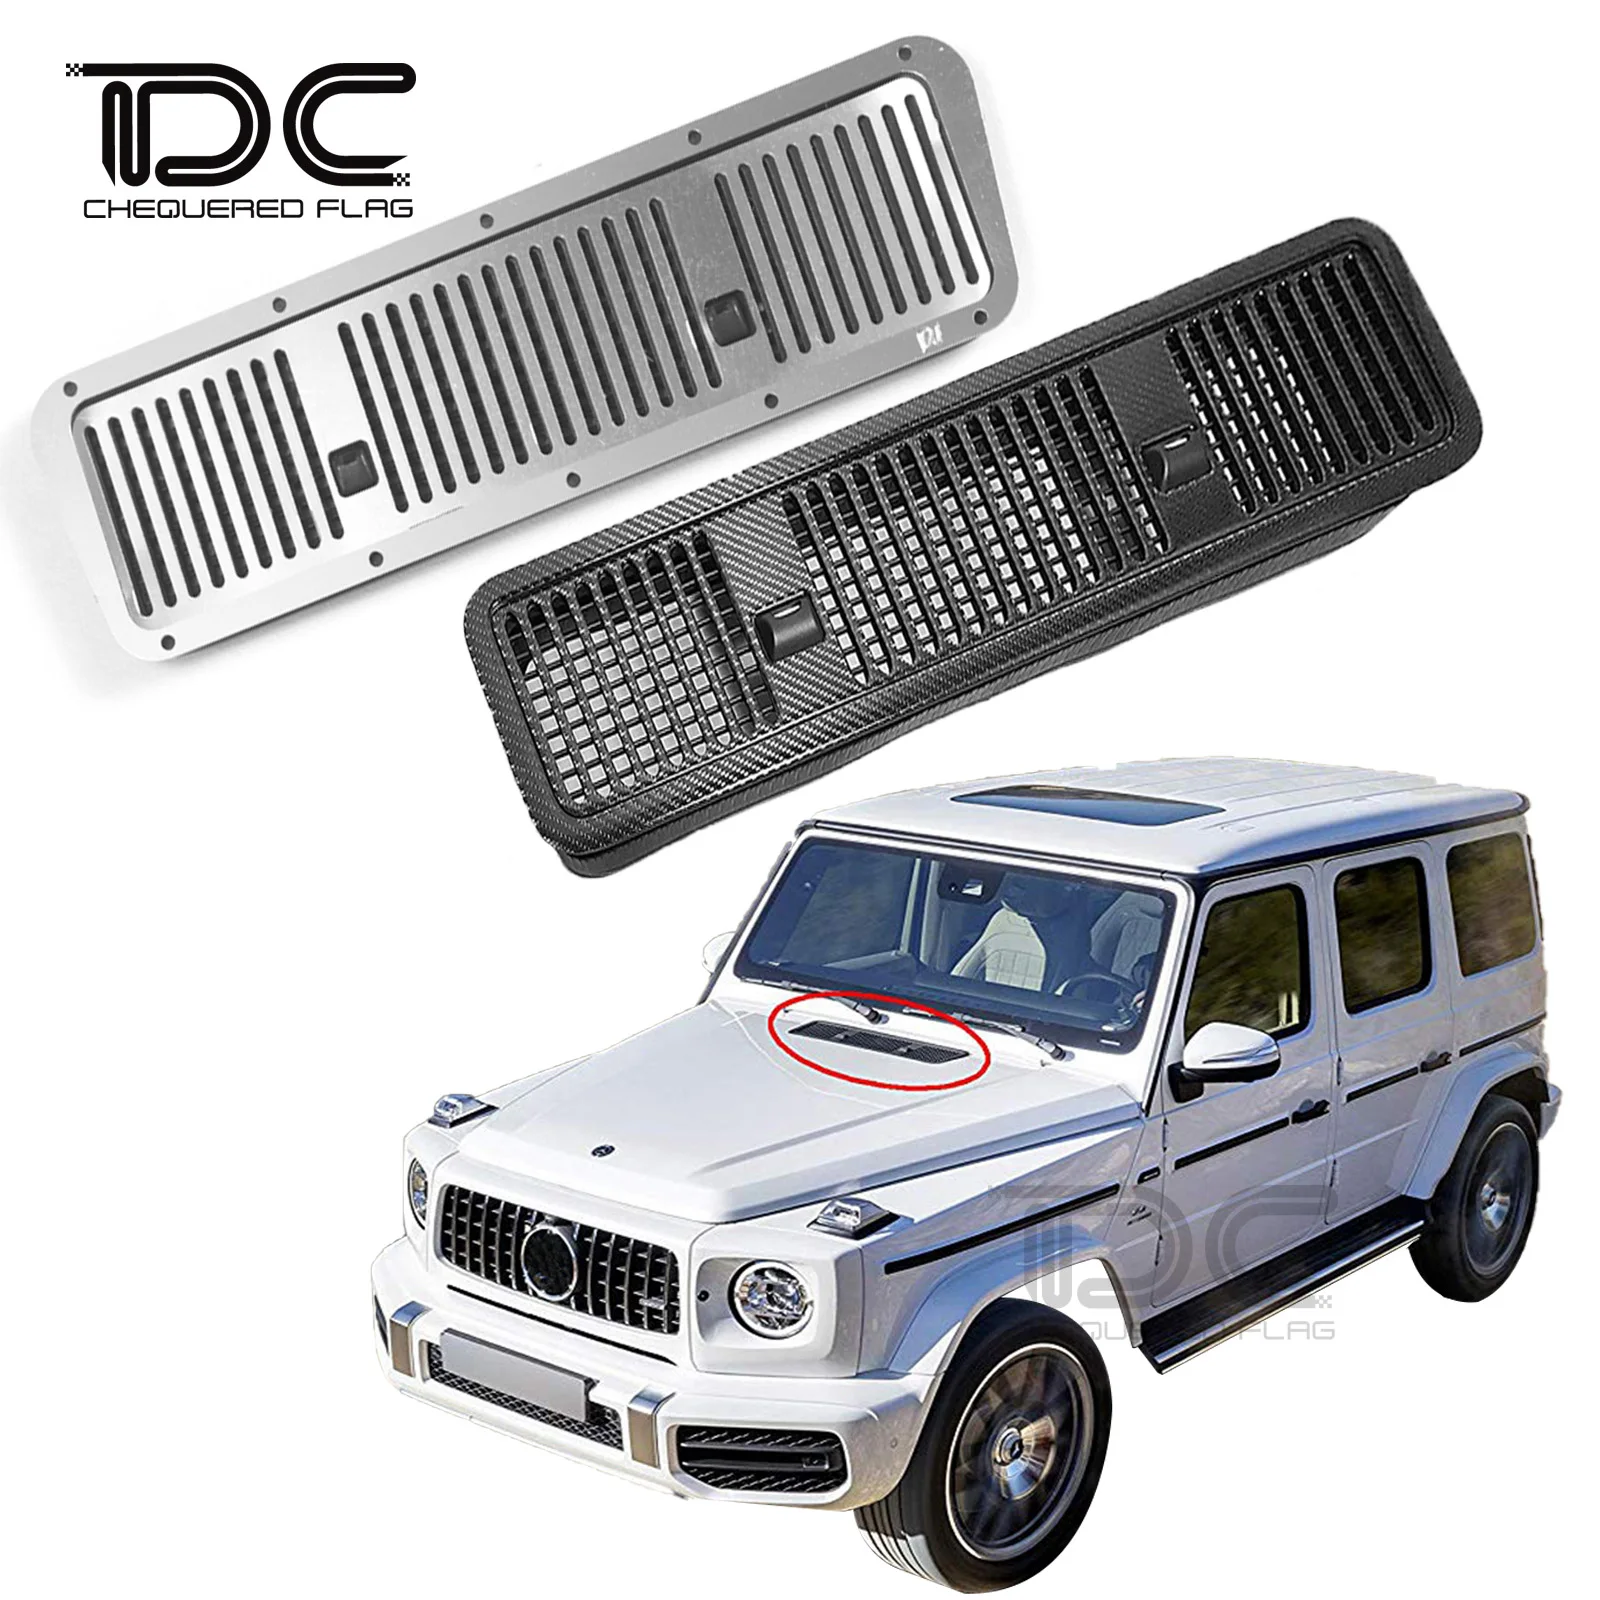 

1/10 Metal Cover Air Intake Vent Grille Wiper Holder Kit for TRX4 G500 TRX6 G63 RC Crawler Car Upgrade Spare Parts Accessories